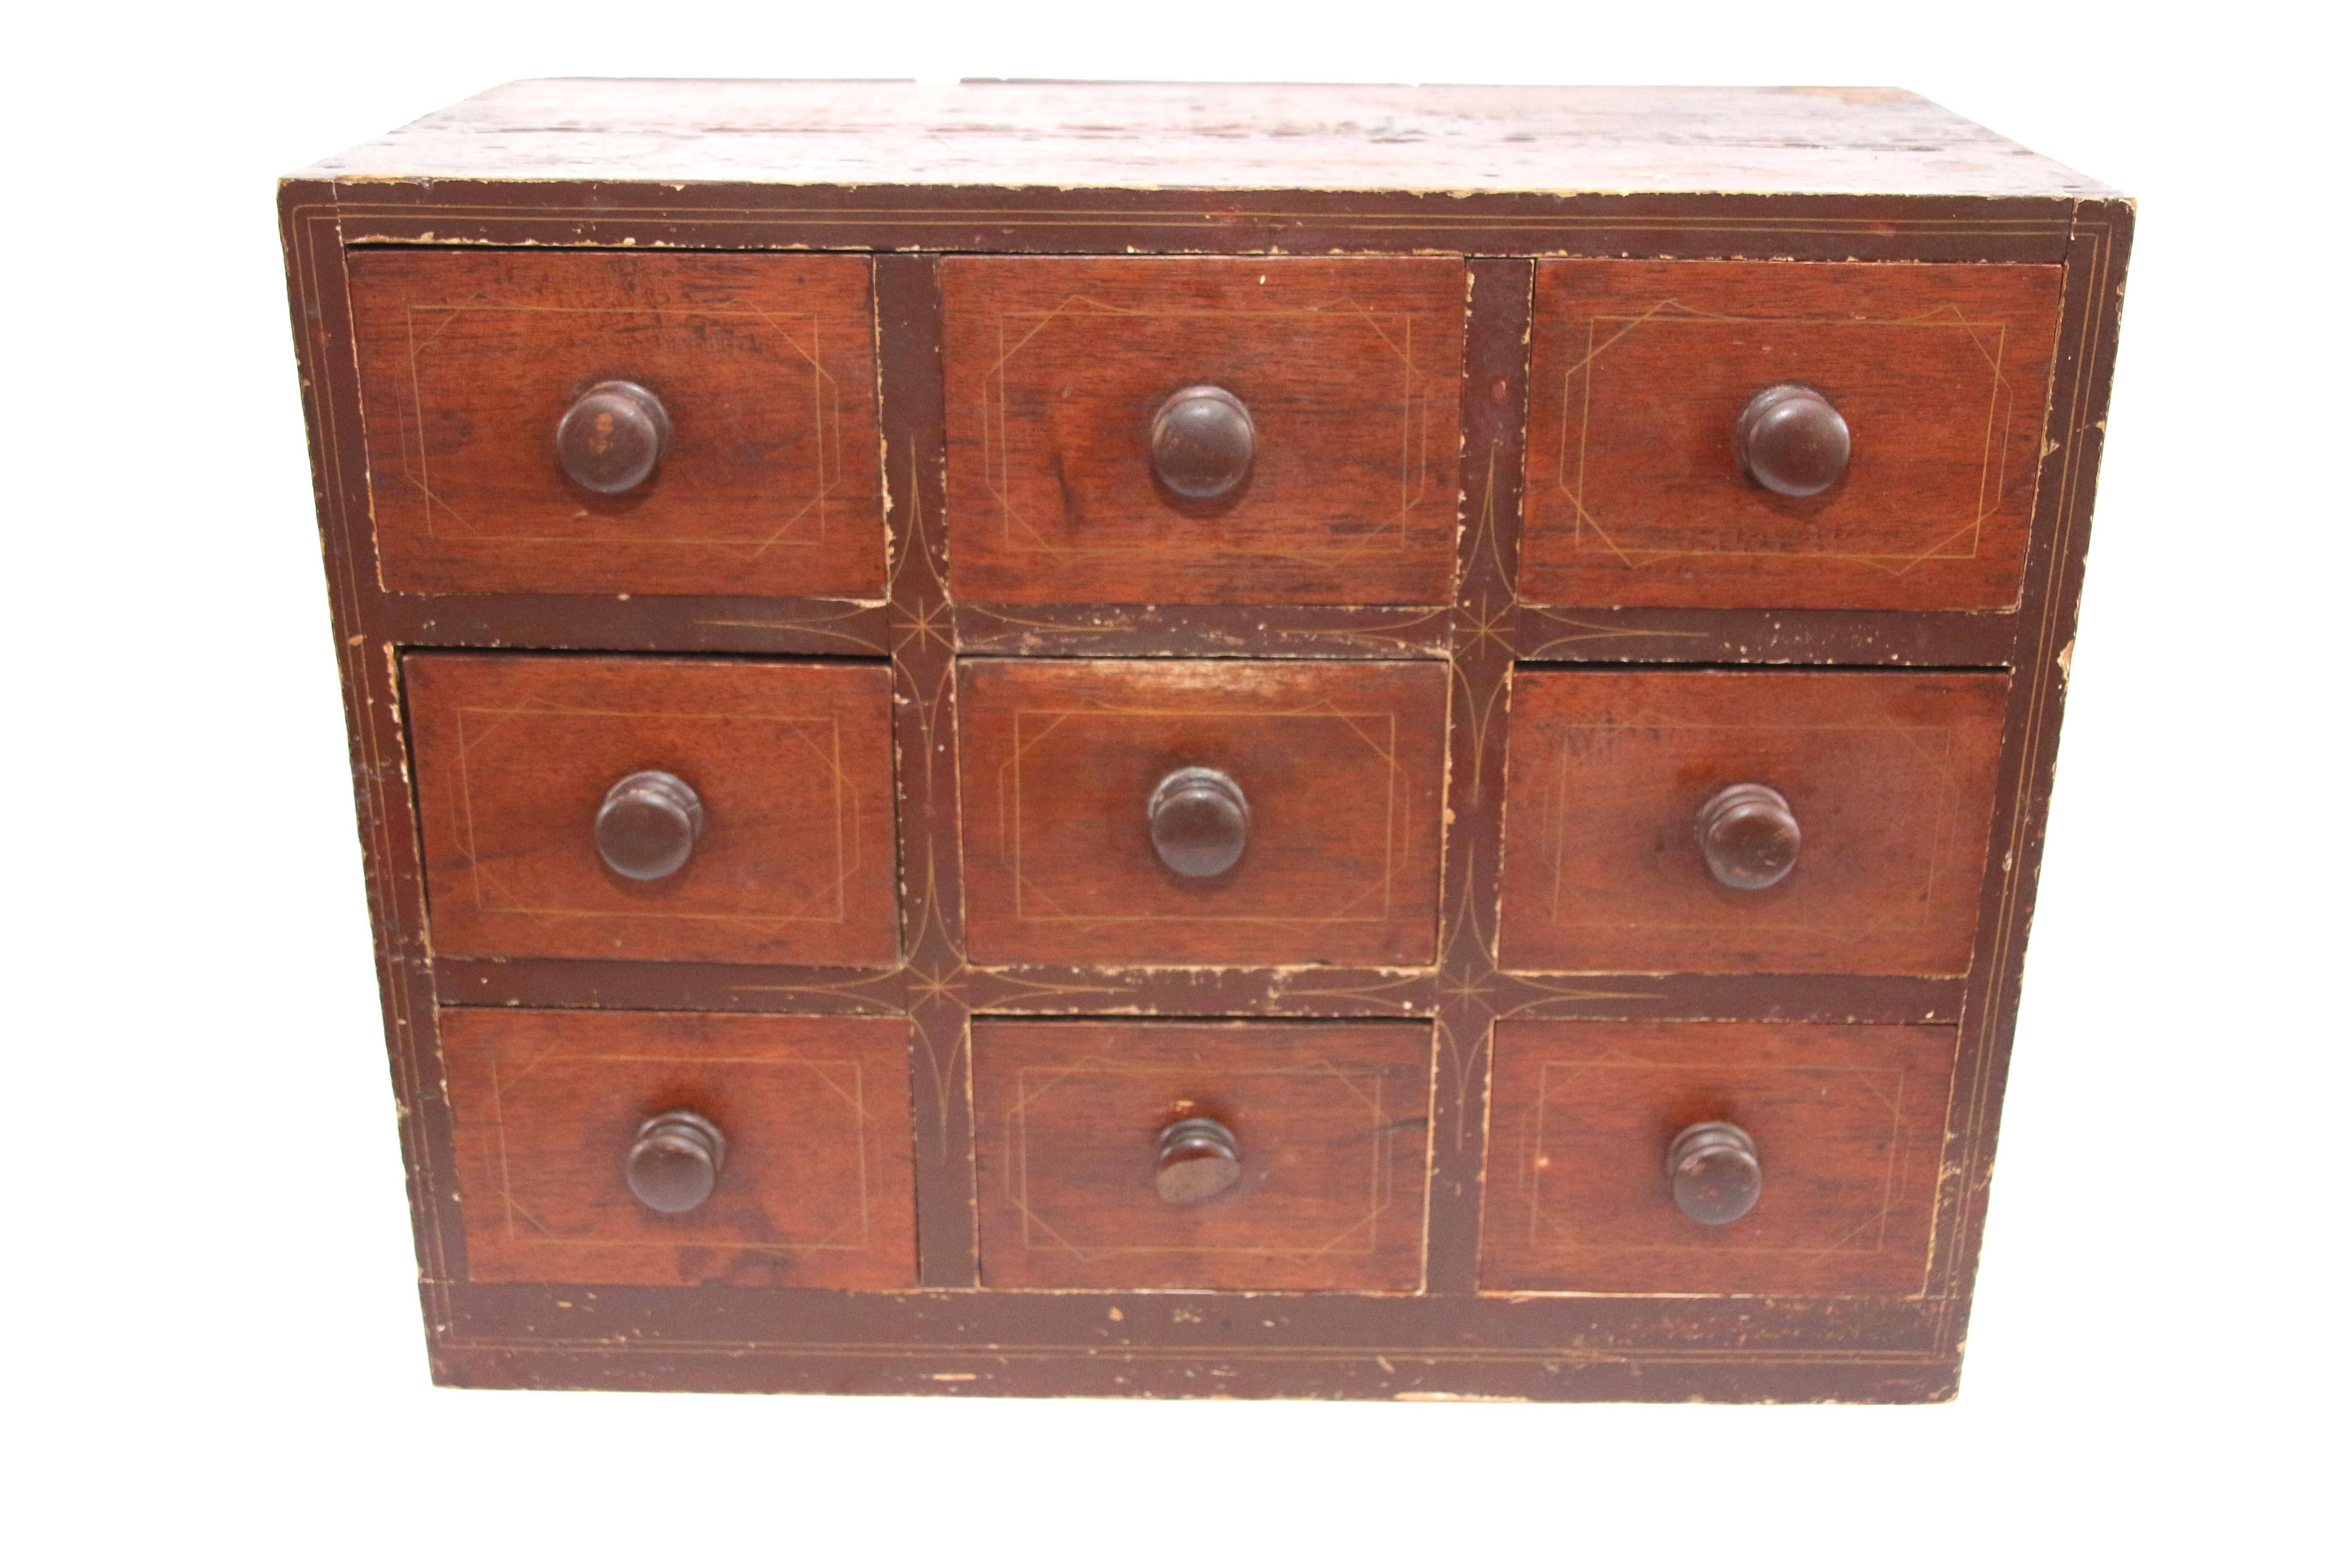 19th century paint decorated apothecary or spice chest made from butternut and basswood. The counter top nine-drawer example in original red paint with yellow pinstripe. The drawer fronts stained dark red with yellow pinstripe, each drawer fitted